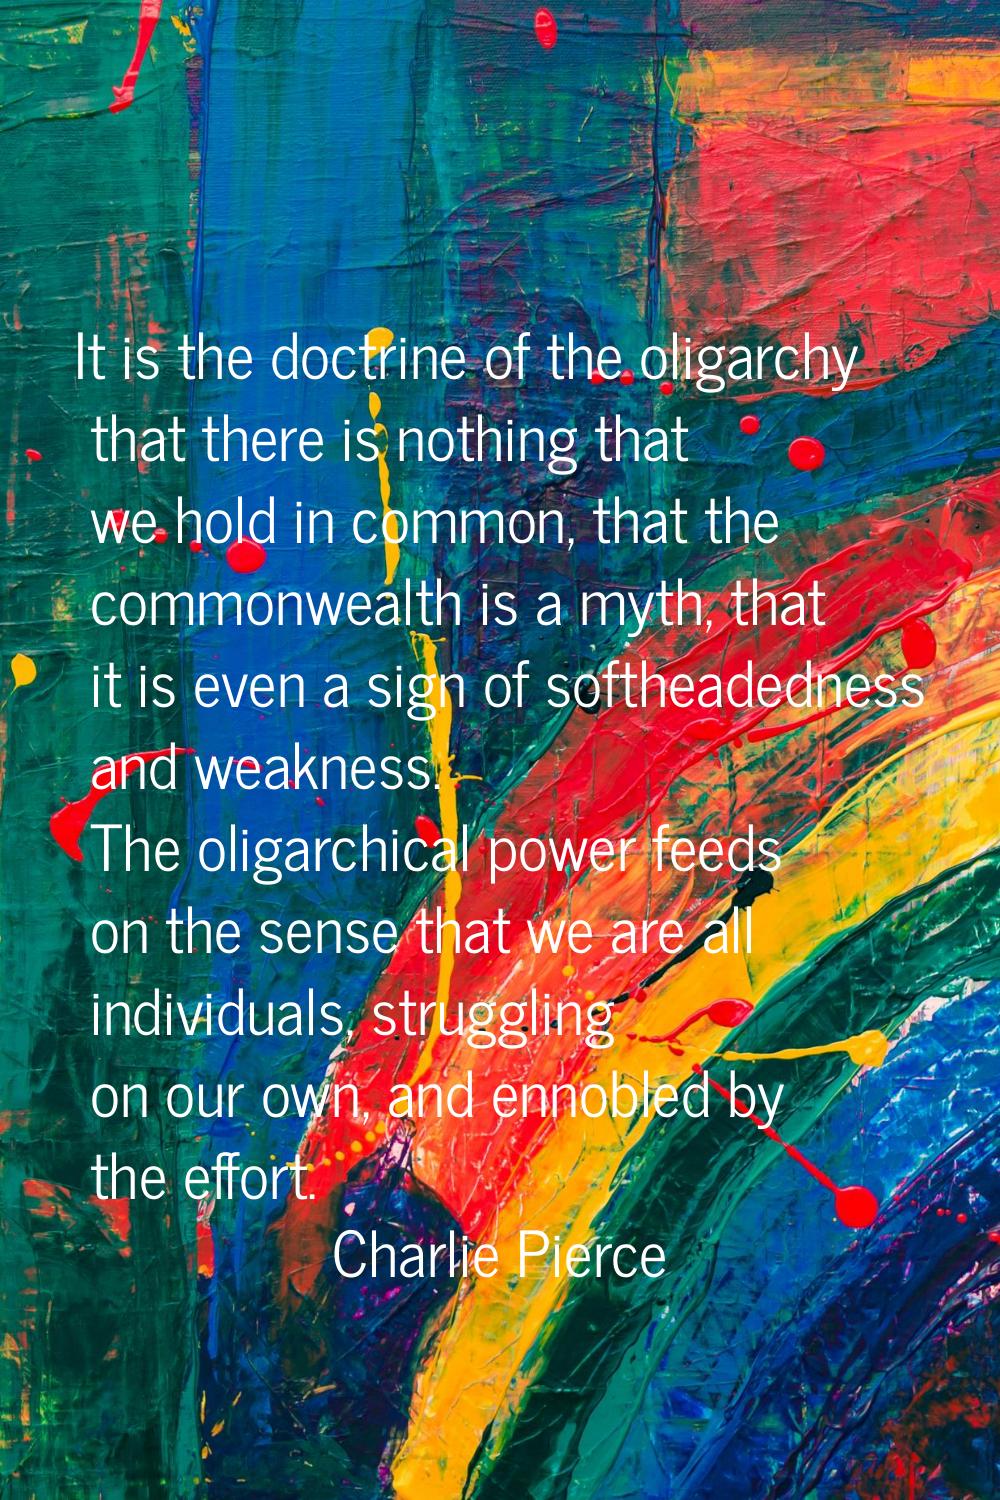 It is the doctrine of the oligarchy that there is nothing that we hold in common, that the commonwe